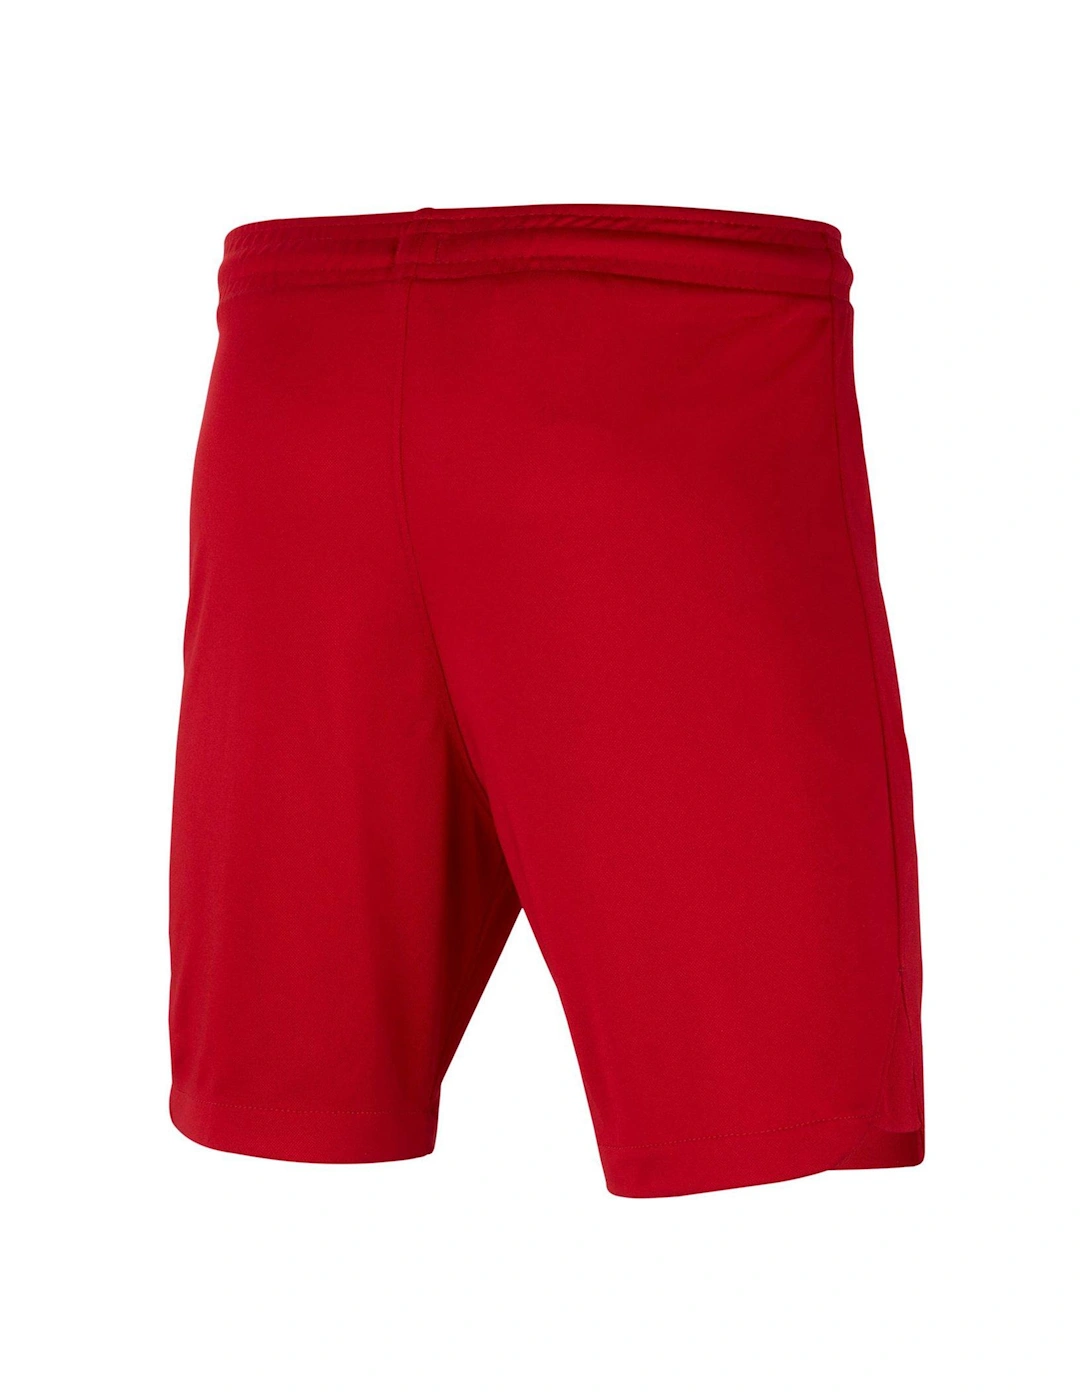 Liverpool Fc Junior 23/24 Home Short - Red